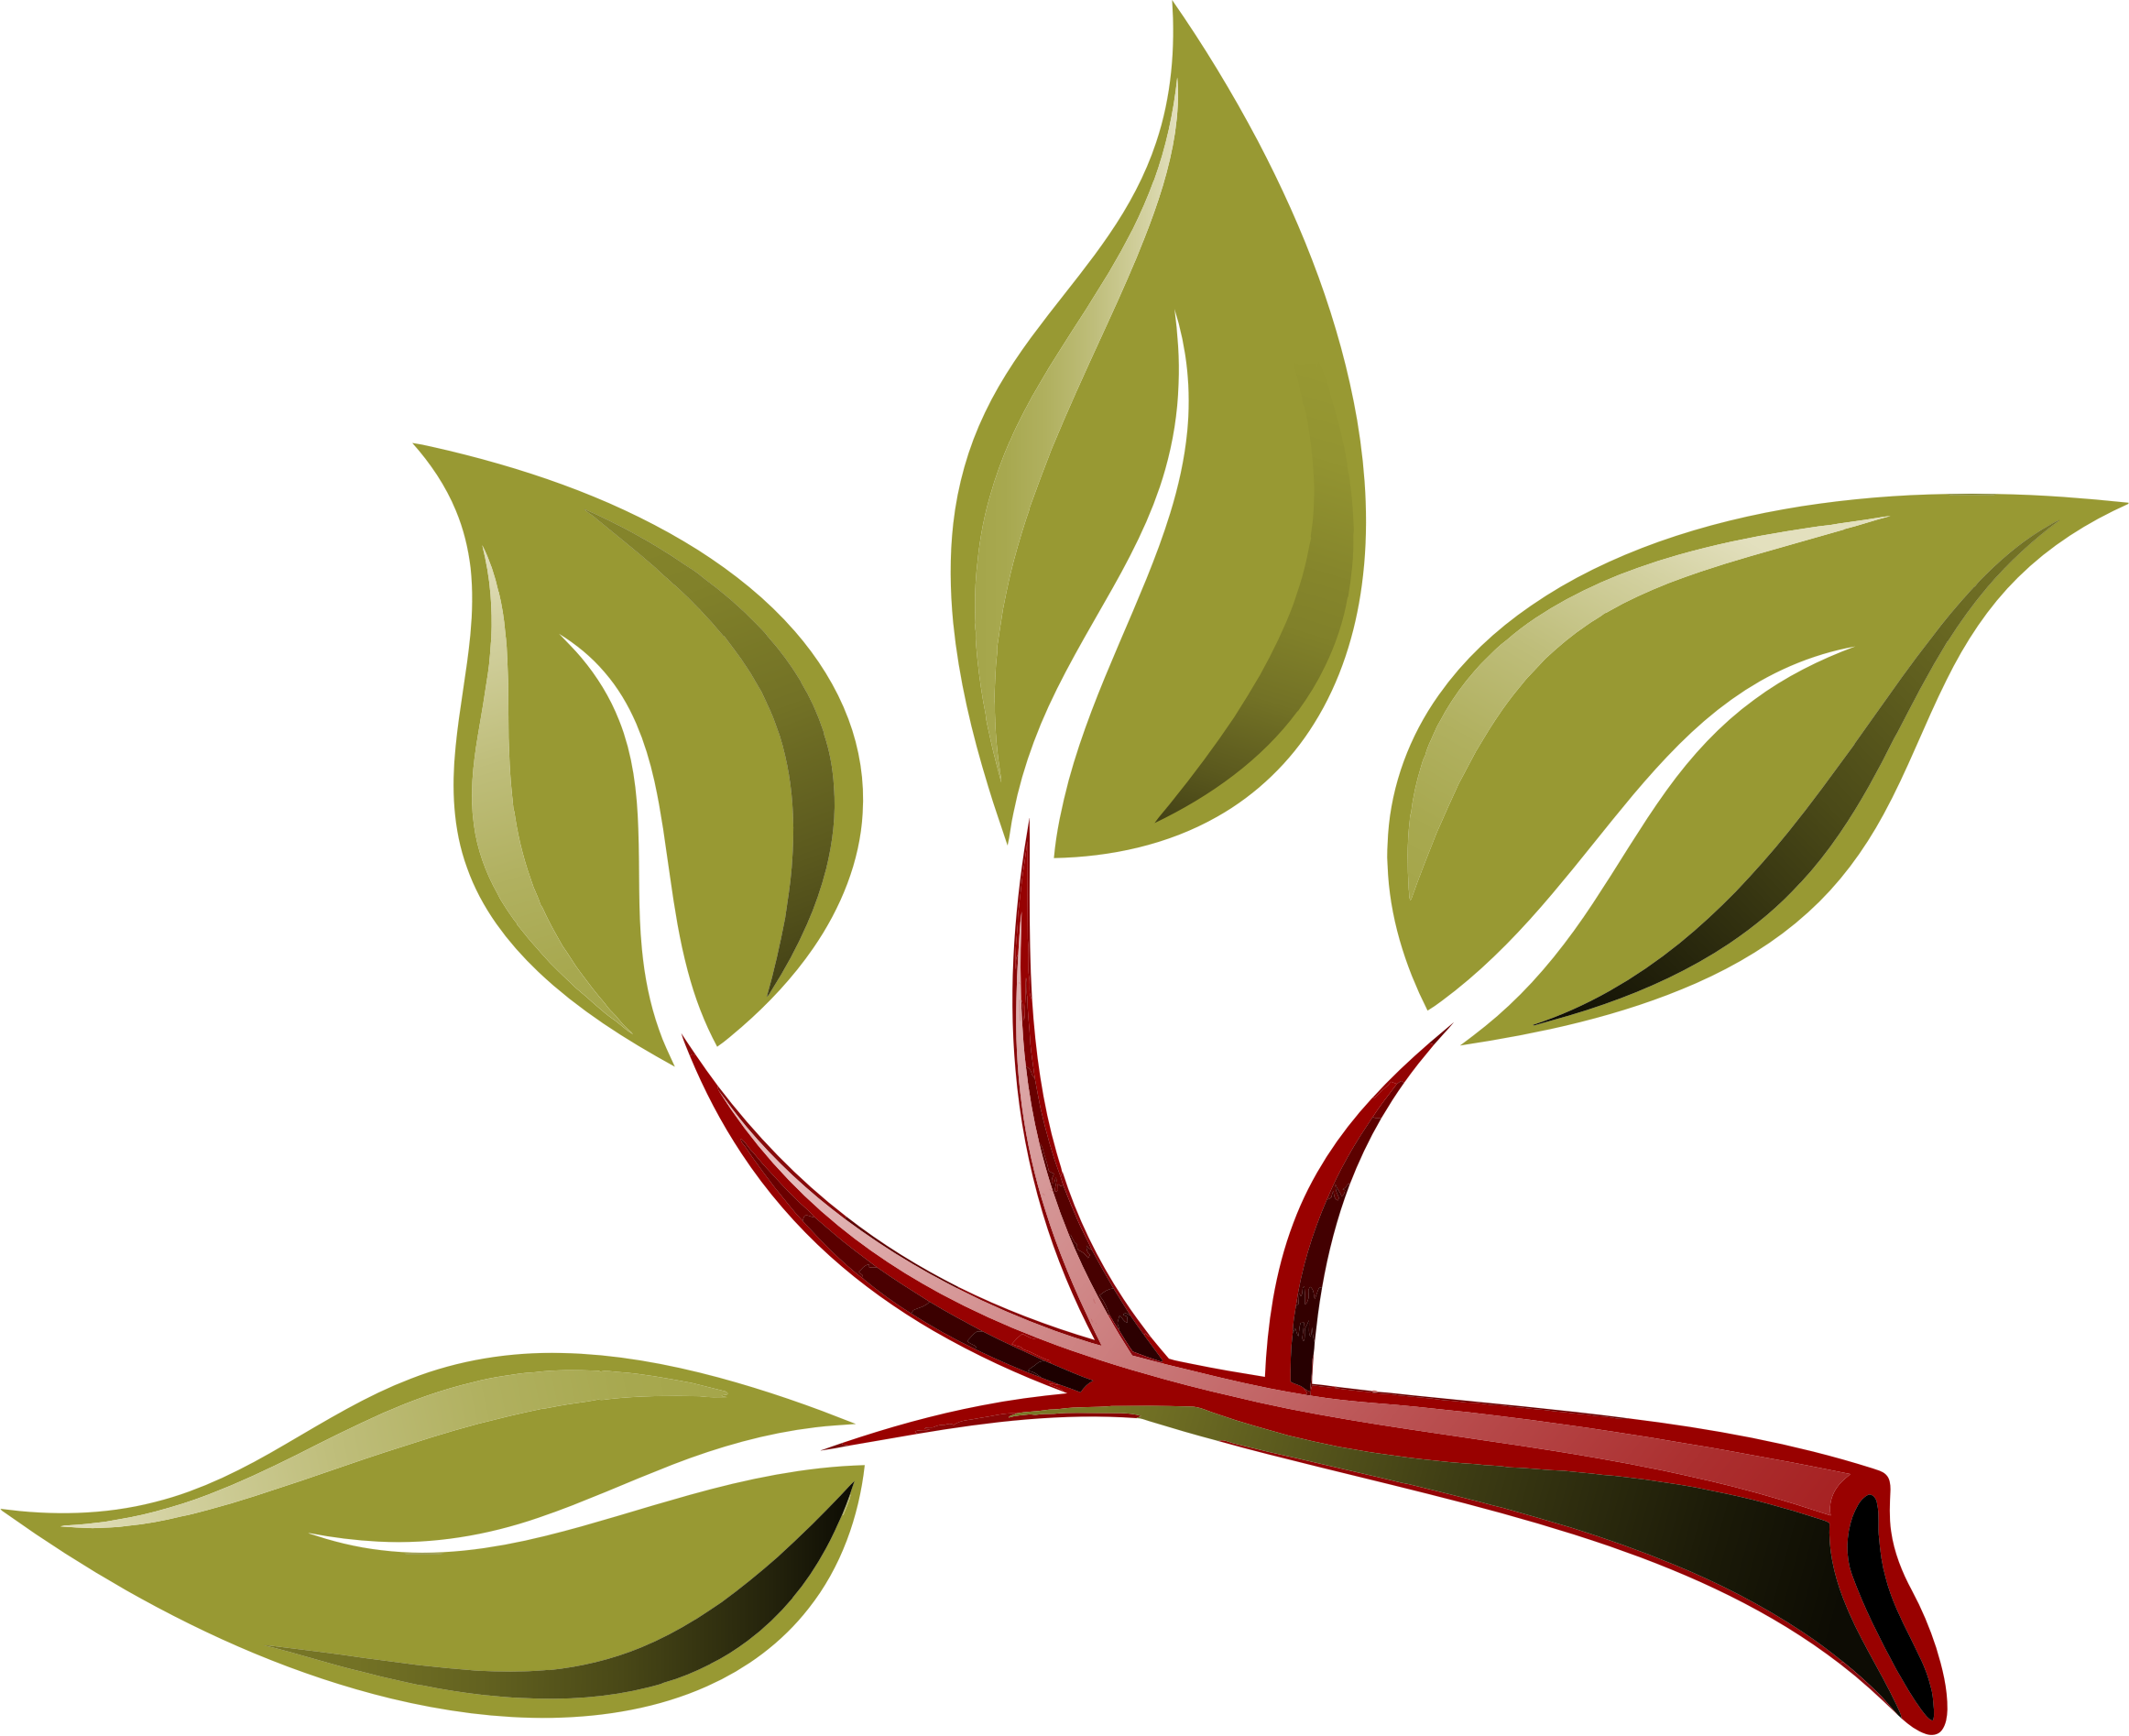 The leaves of the branch clipart - Clipground